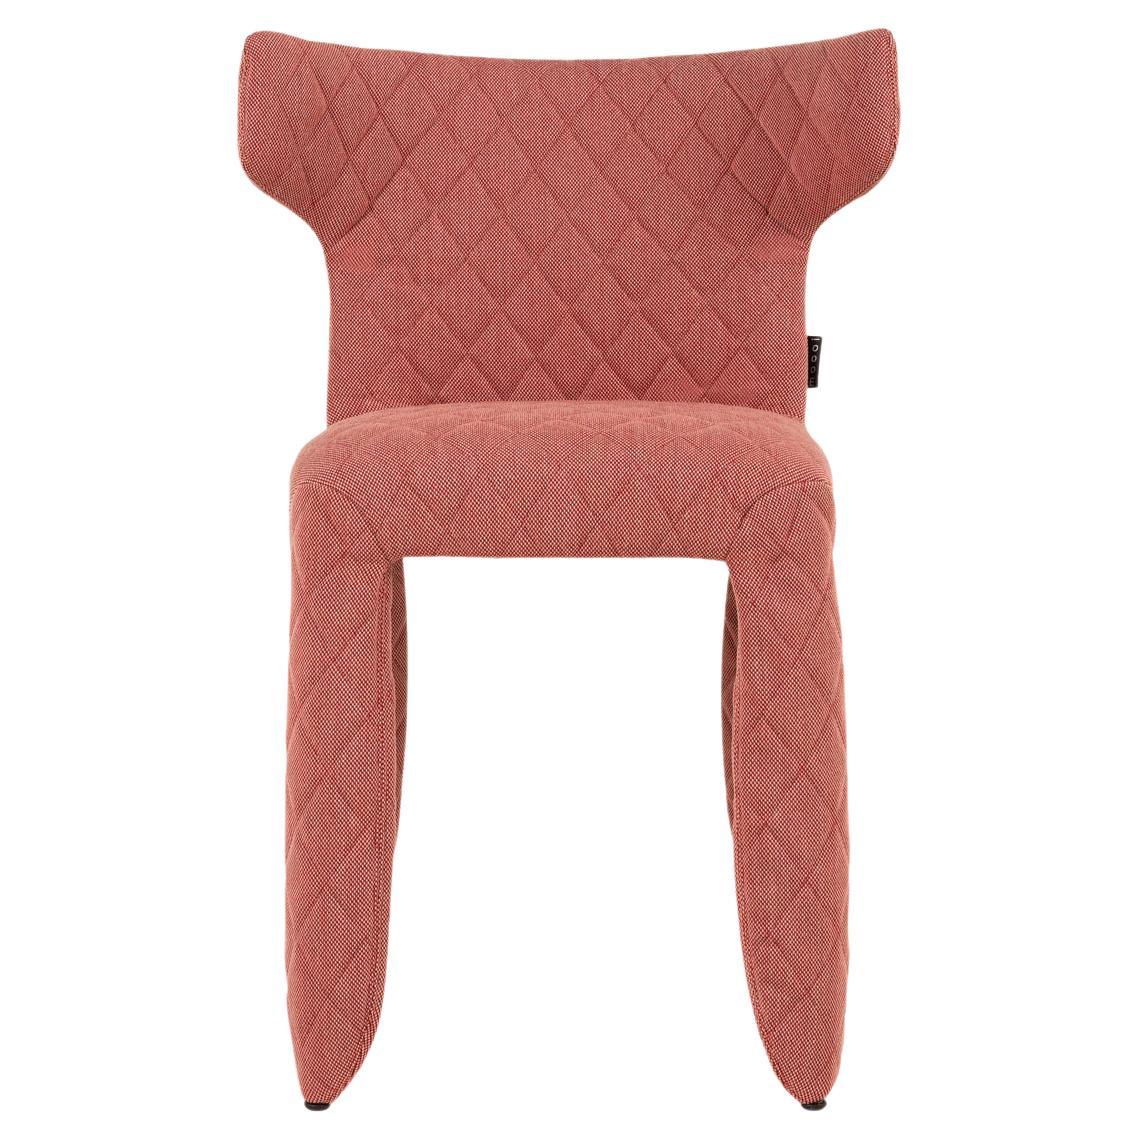 Moooi Monster Diamond Chair with Arms in Steelcut Trio 3, 526 Pink Upholstery For Sale